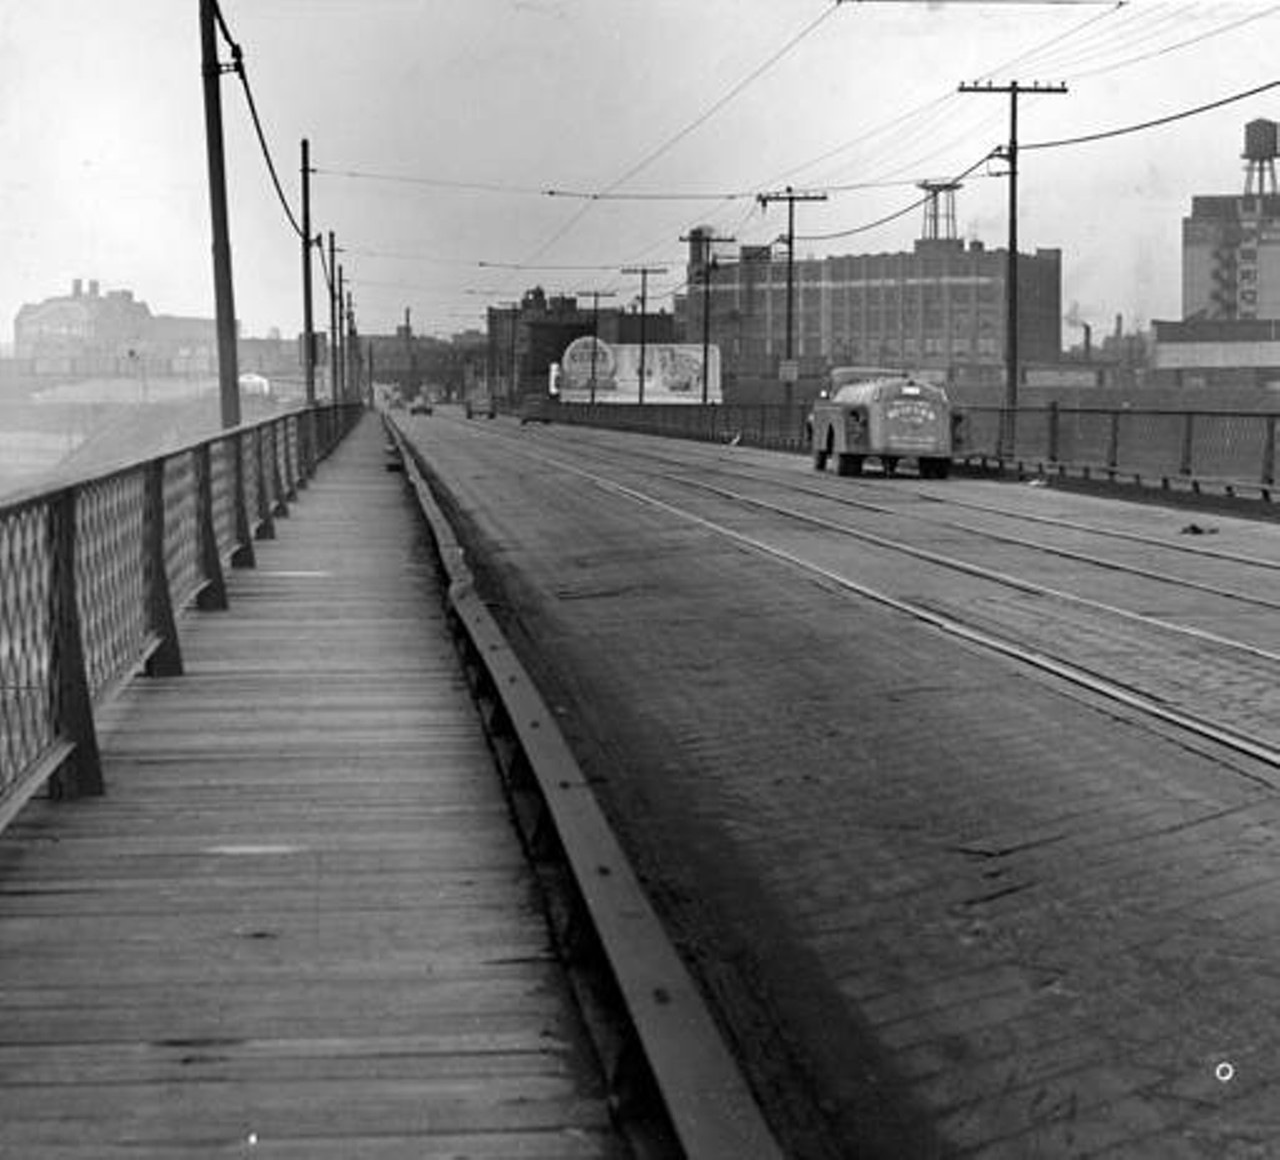 Shows the the deck of the East 34th Street Bridge in Cleveland, Ohio, in 1948. The sidewalks and trolley car tracks are visible. The traffic is light.